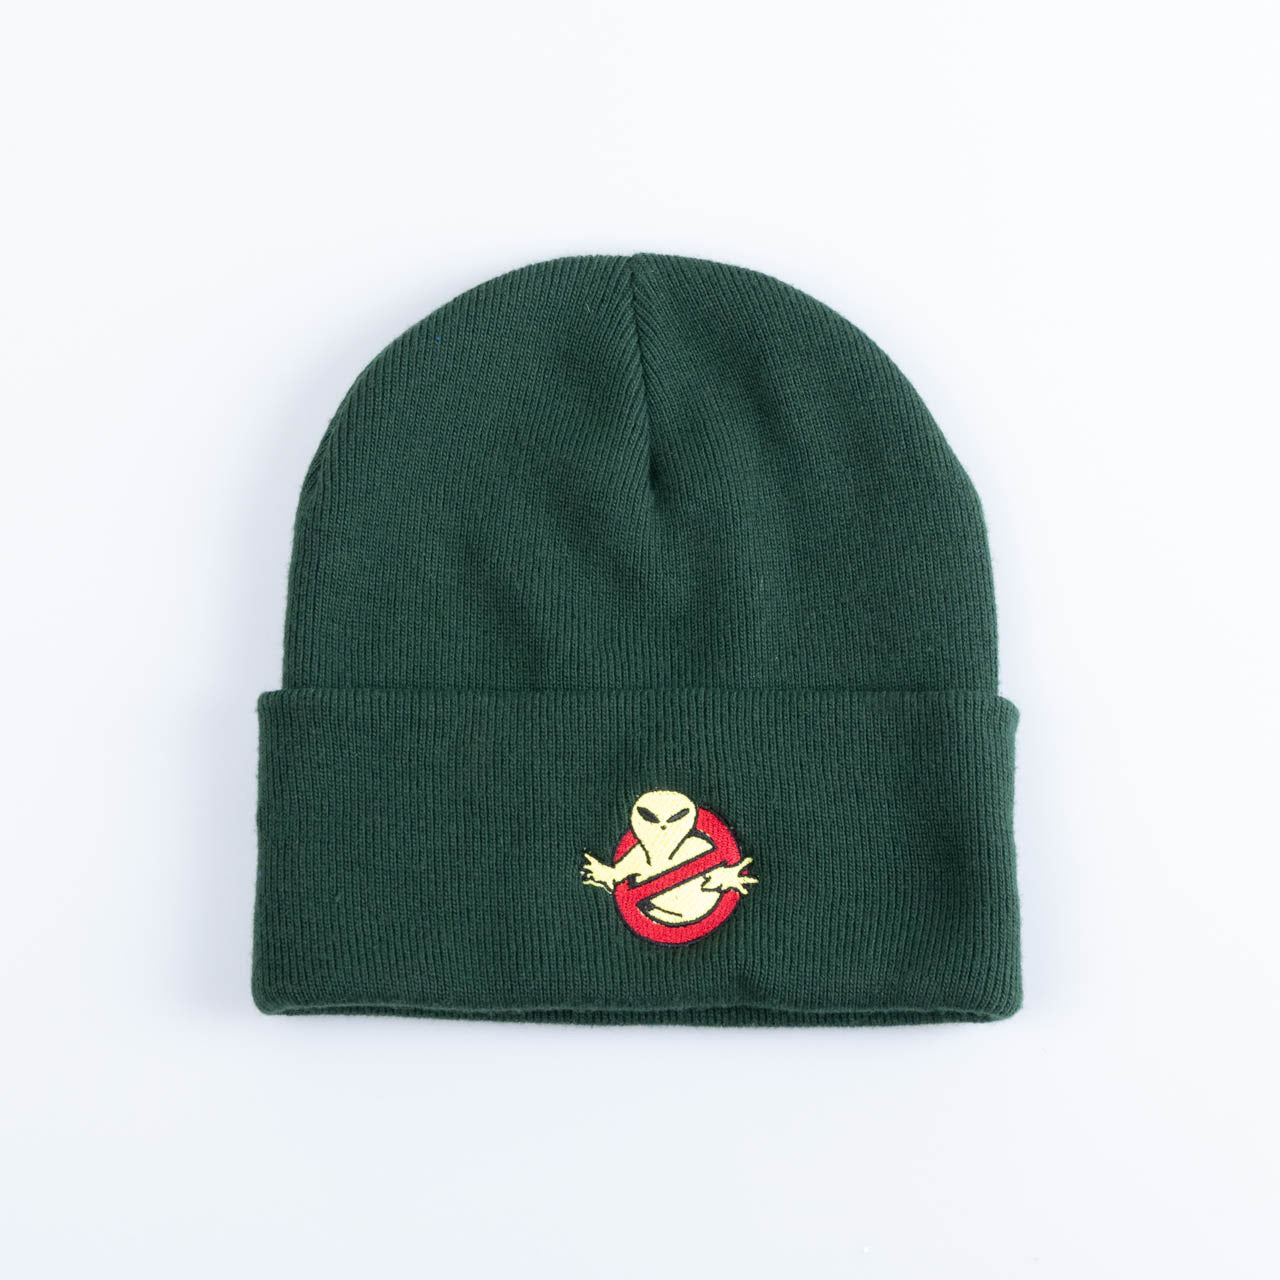 Snash - Snashbusters Beanie